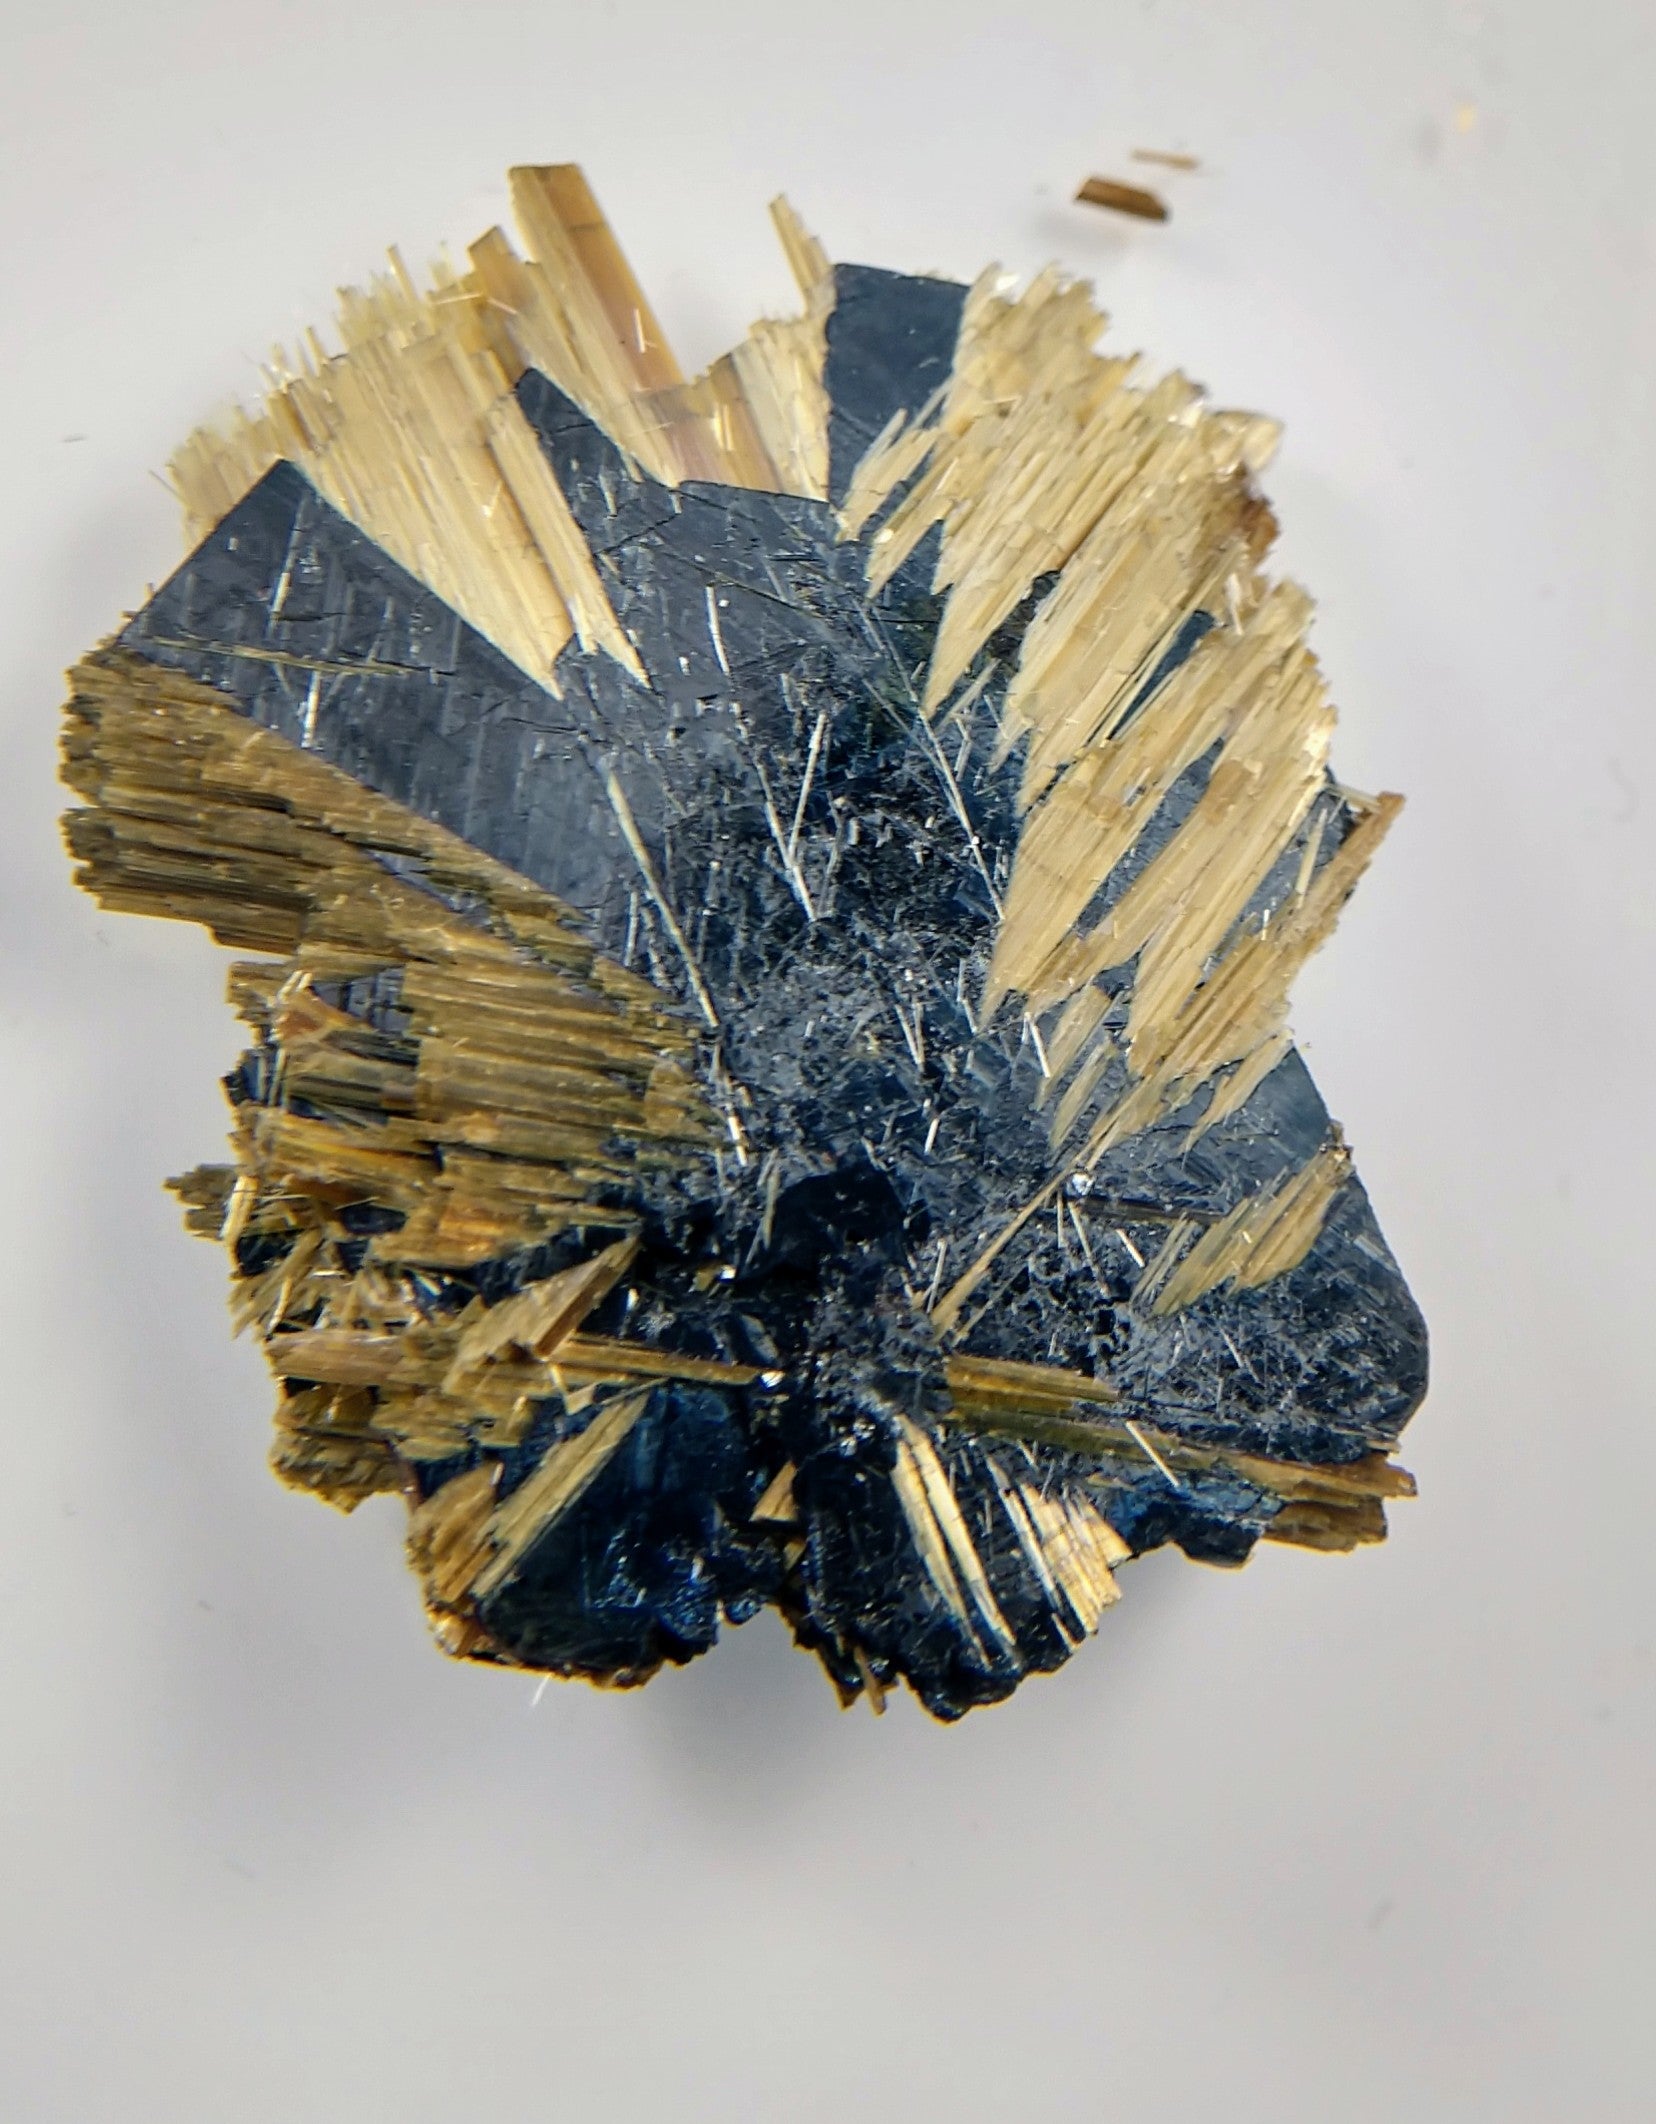 Rutile and Hematite from Brazil